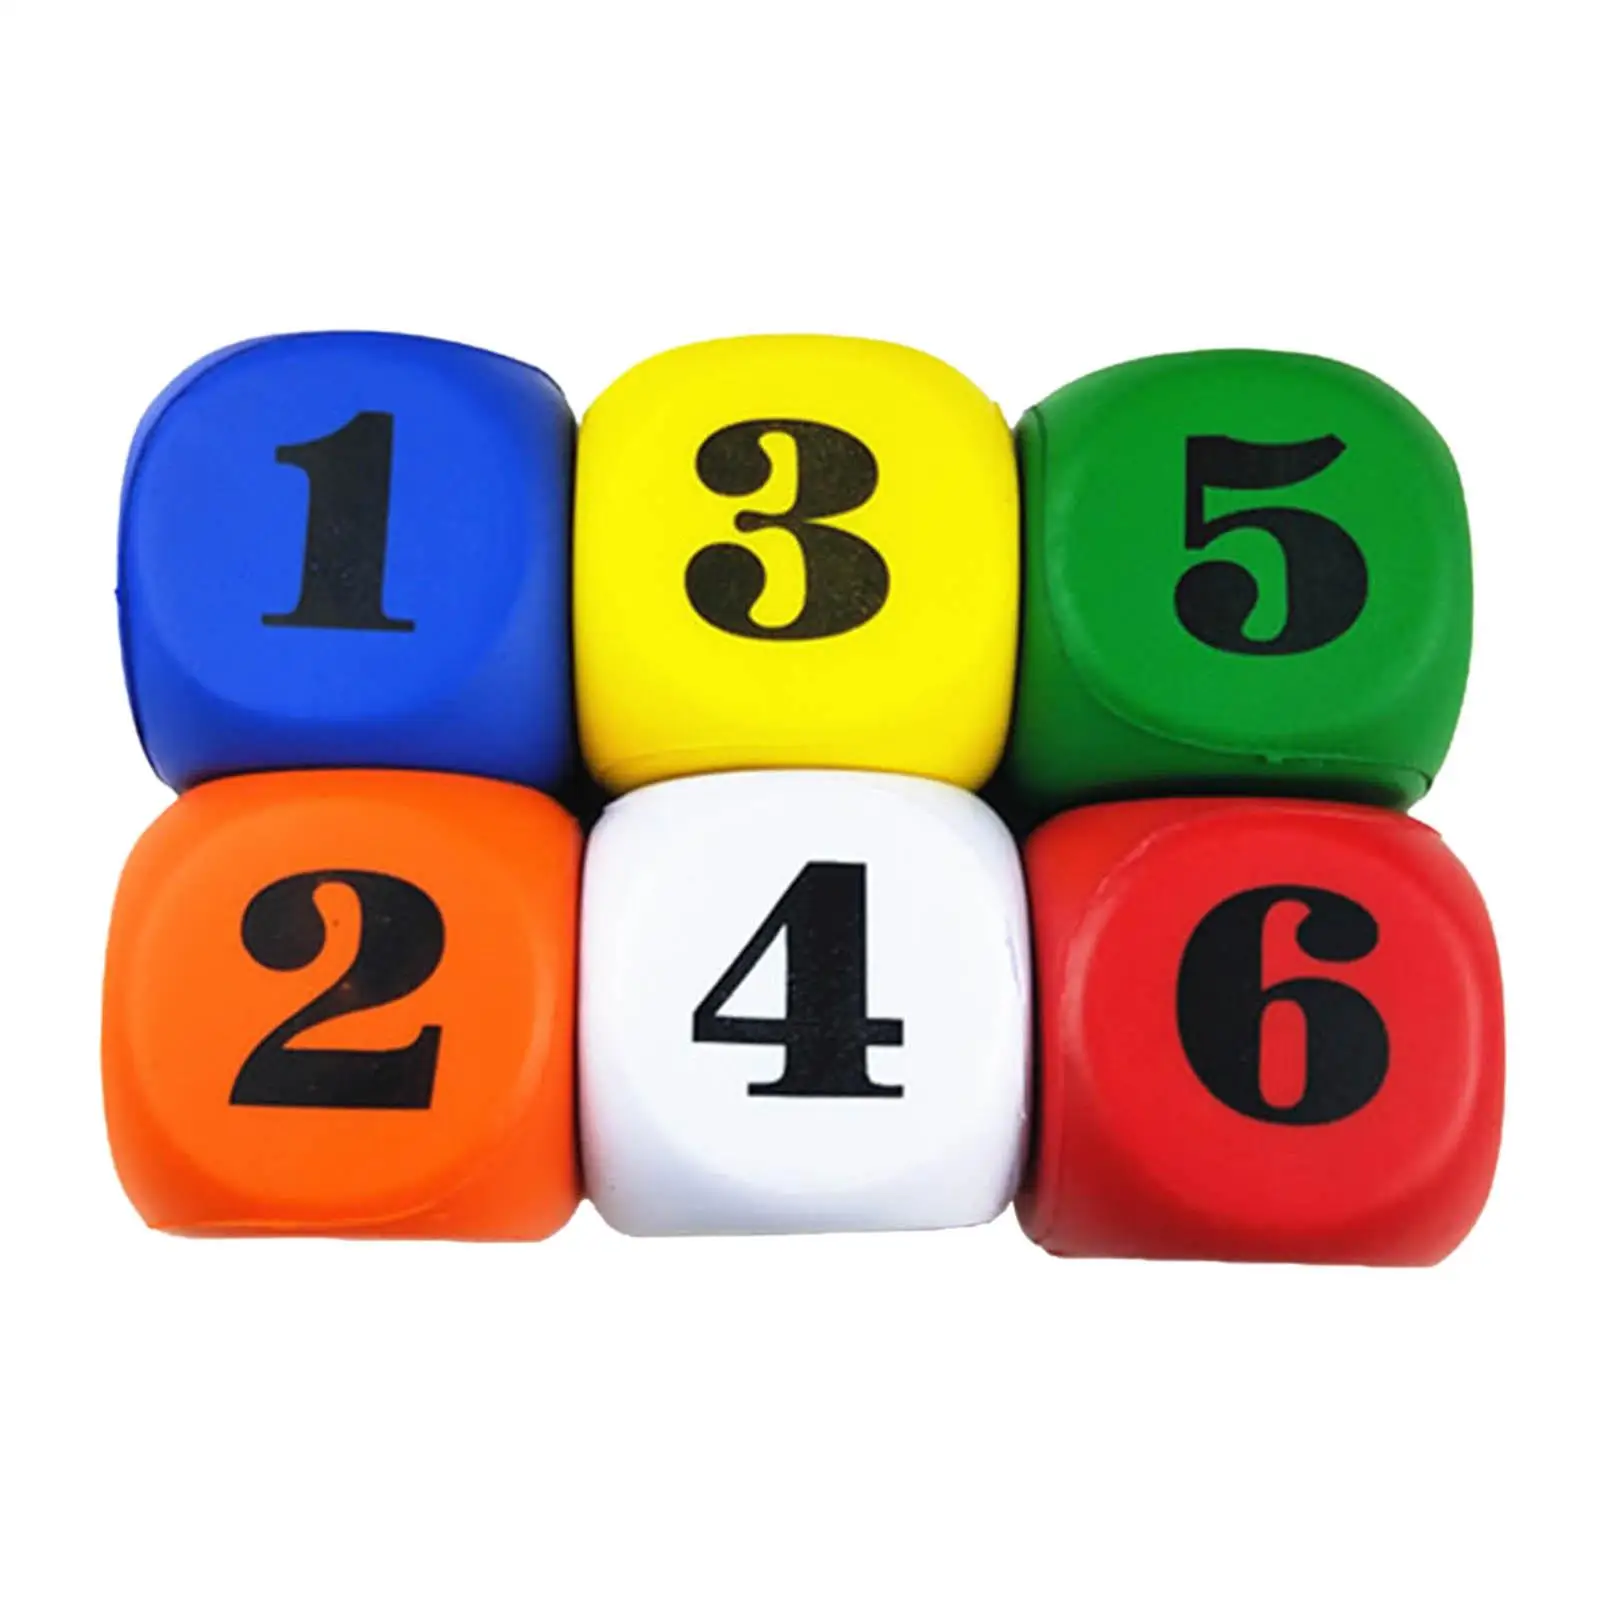 6 Pieces Foam Playing Dice Multicolor for Ages 3+ Educational Toys Kids Students